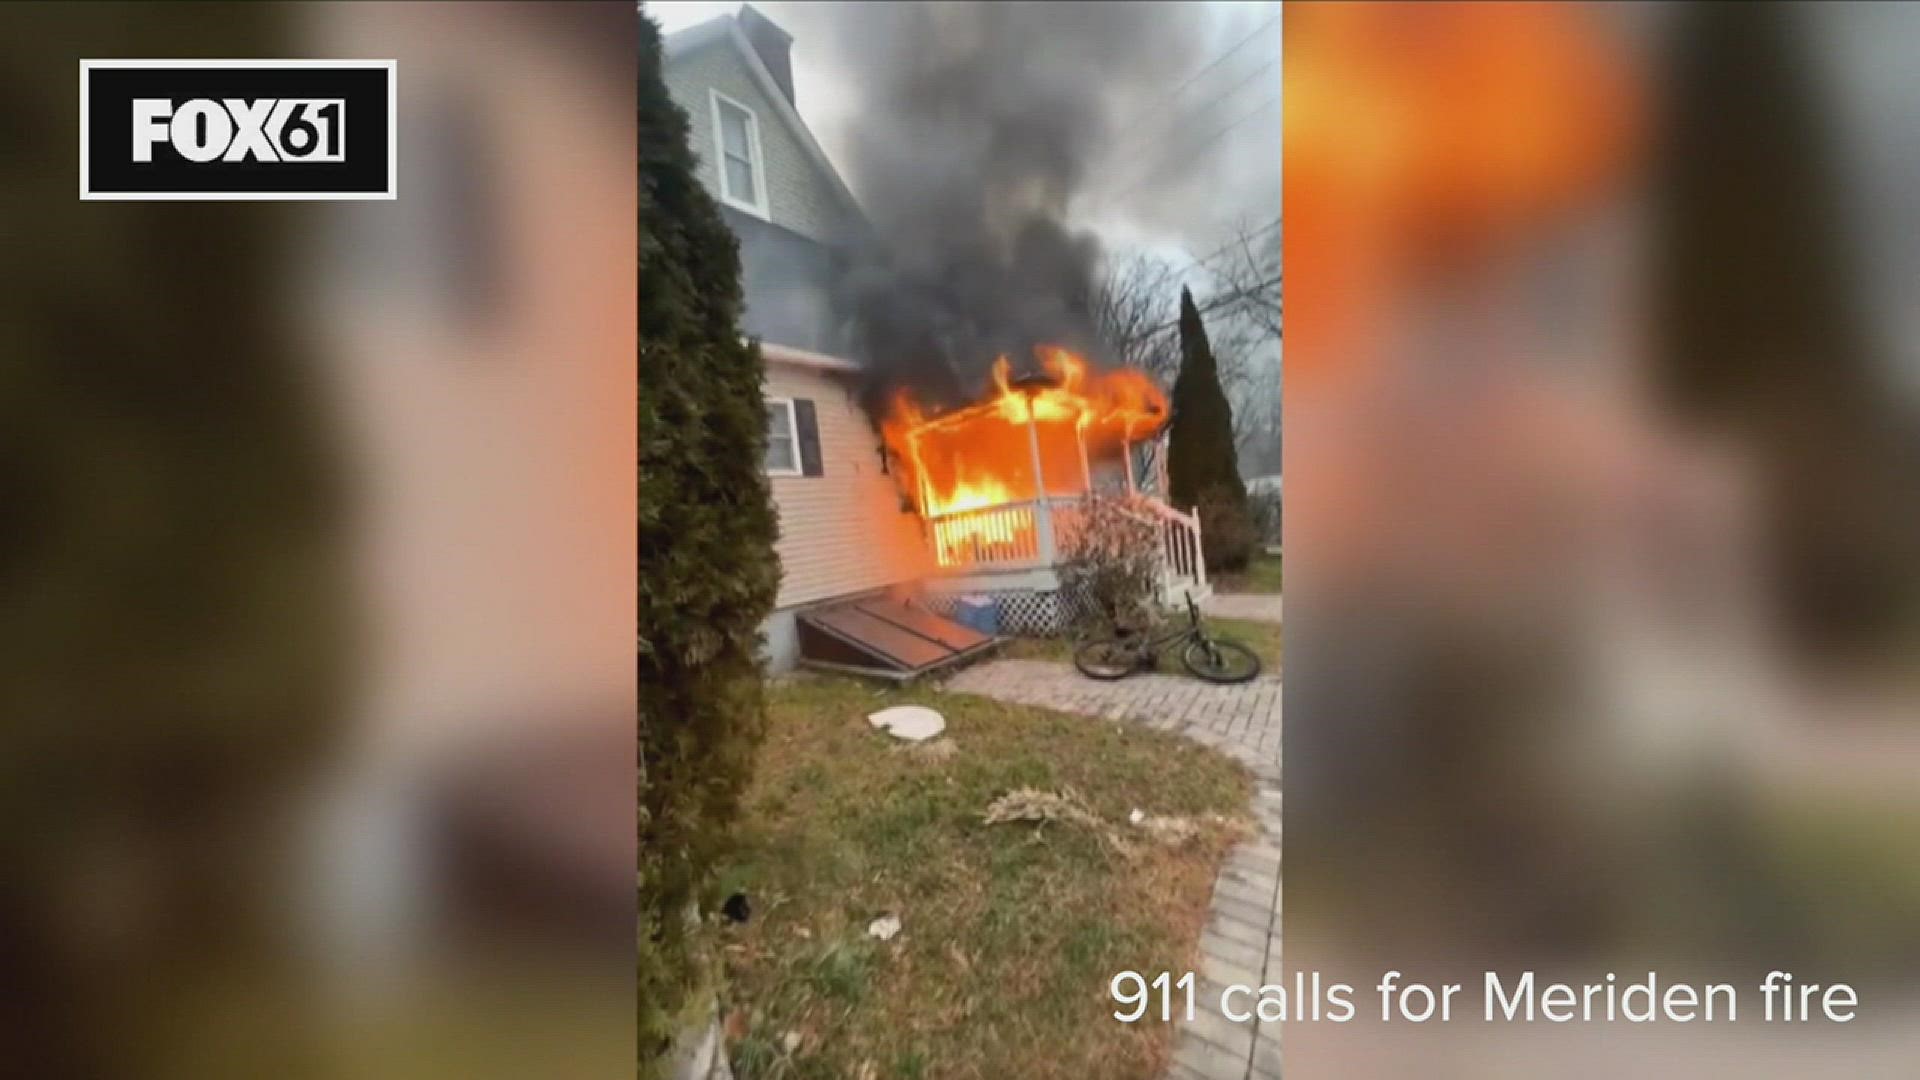 Firefighters pulled an unconscious person from the home and four firefighters were hurt.